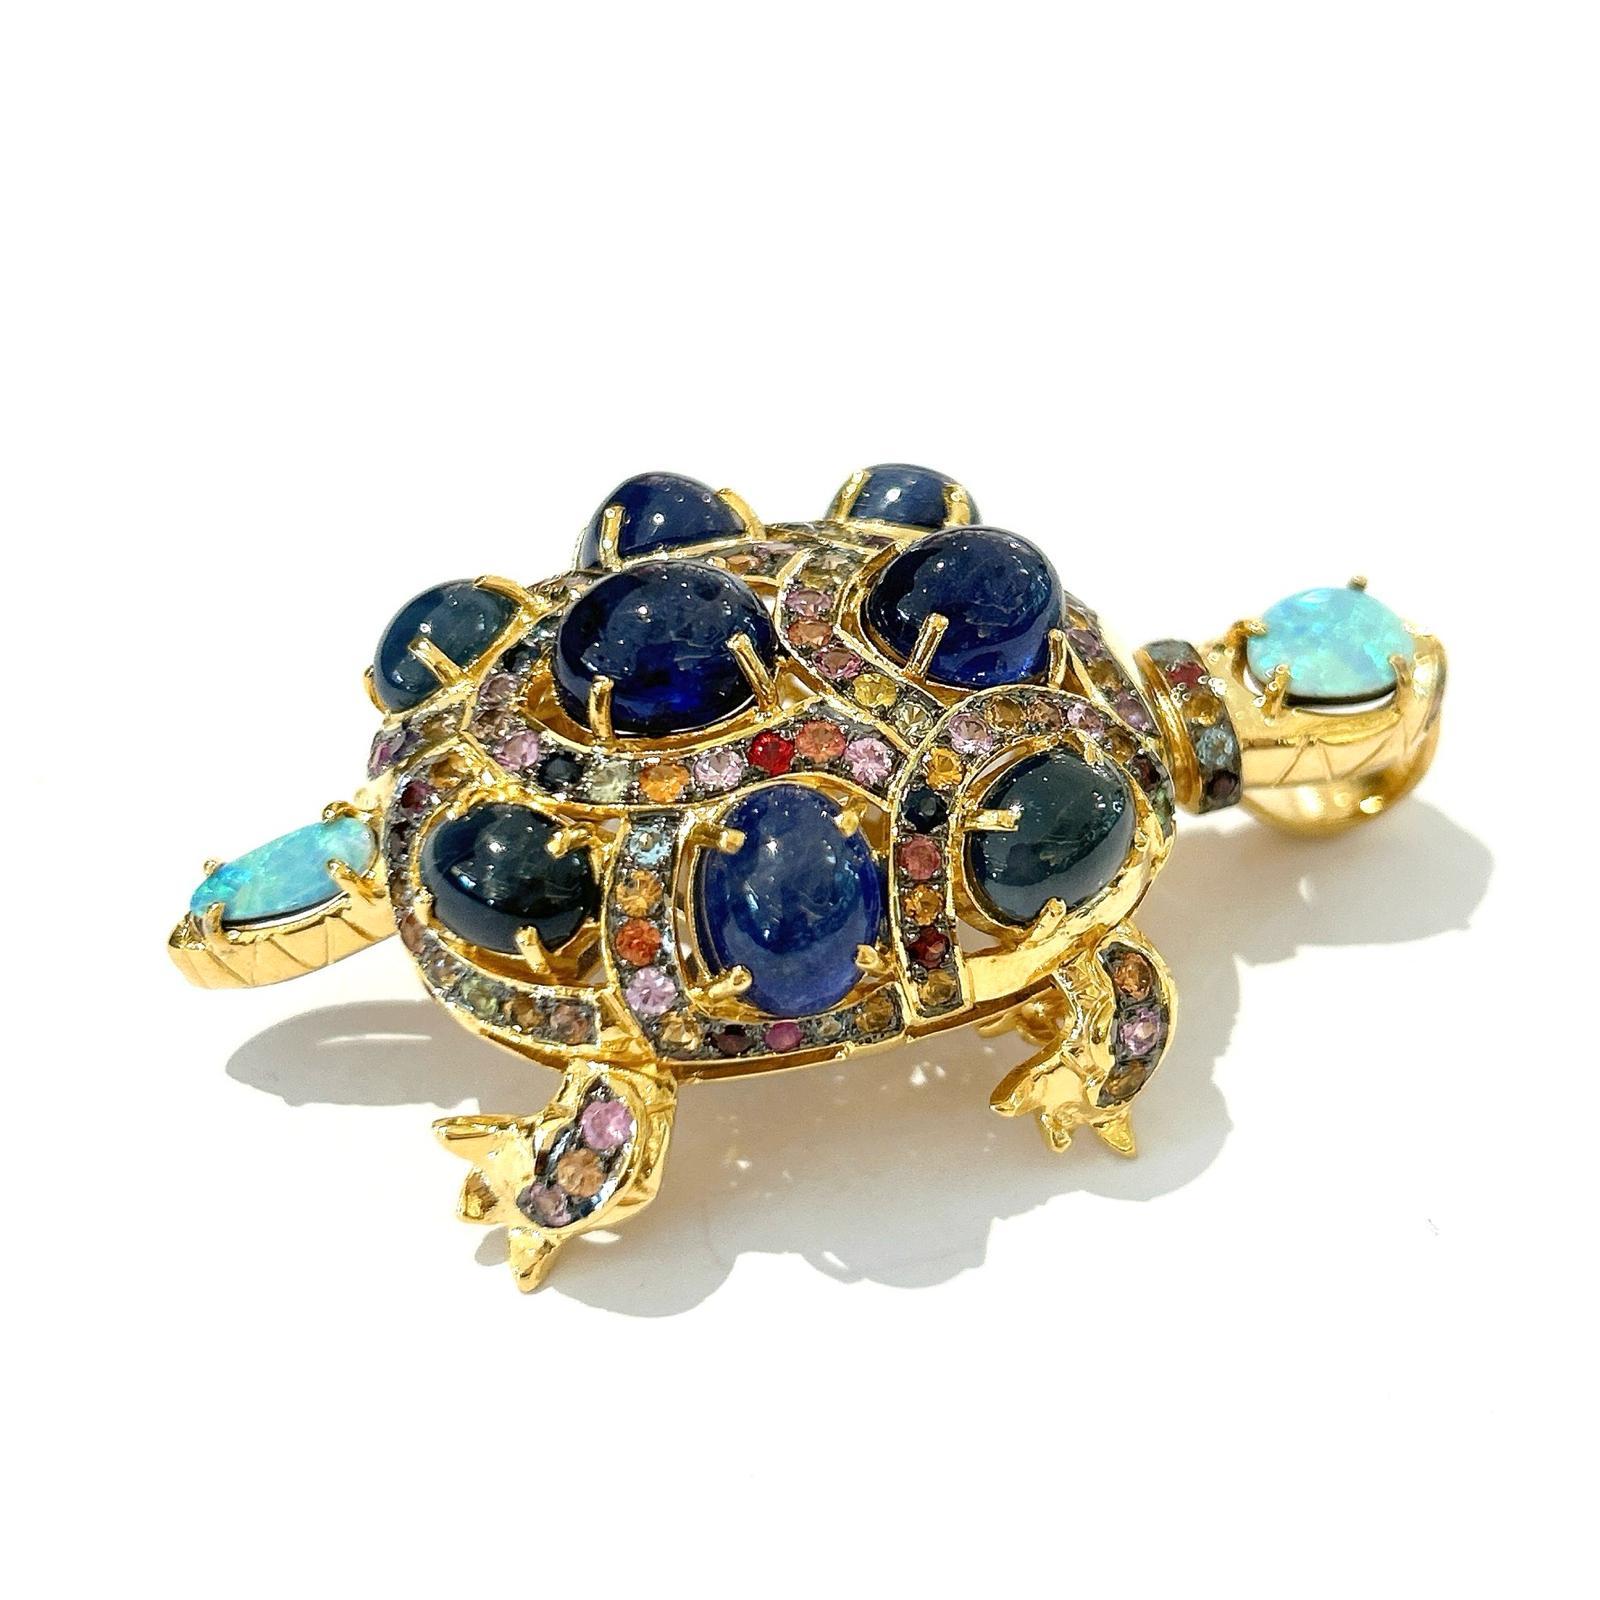 Bochic “Orient” Retro Multi Sapphires & Opal Brooch Set In 18K Gold & Silver  In New Condition For Sale In New York, NY